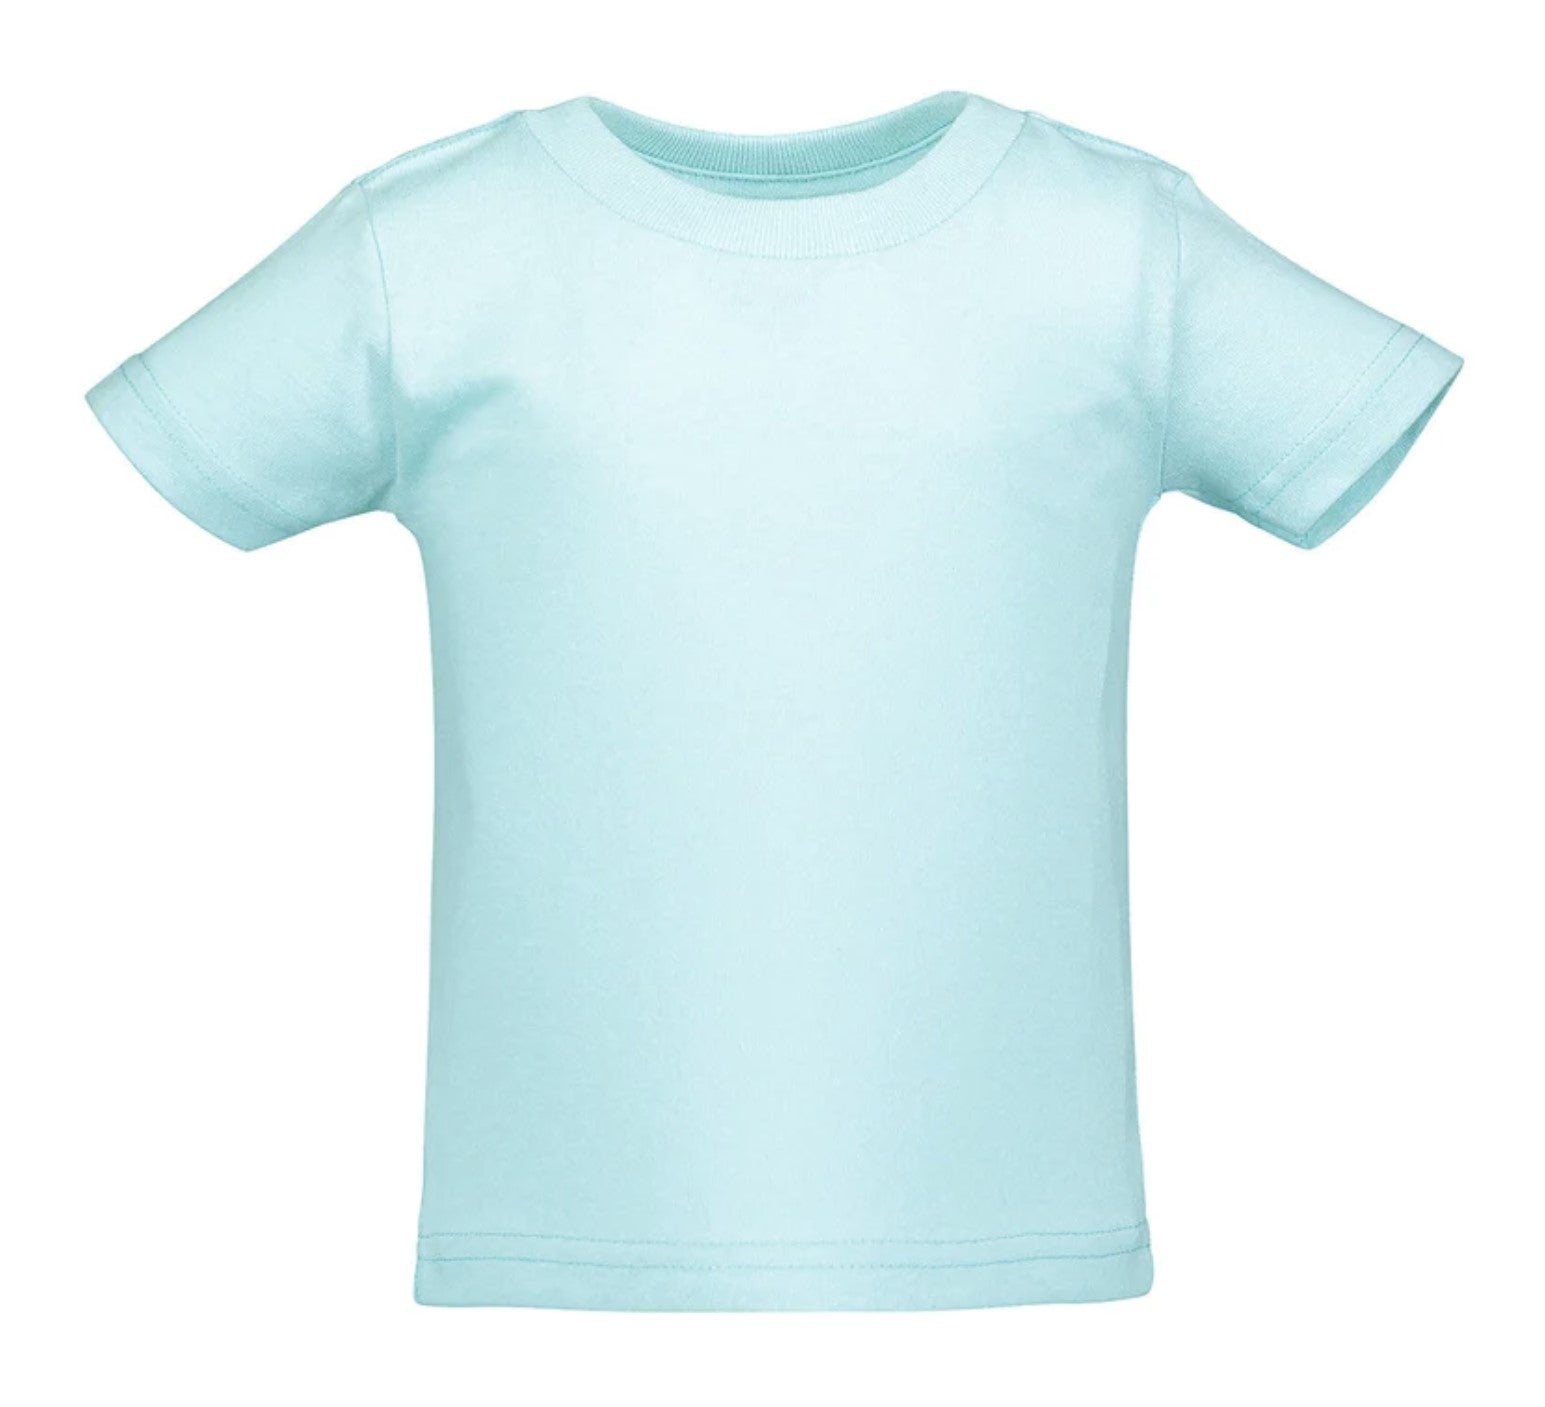 Toddler Jersey T-shirt, 100% Cotton, Chill